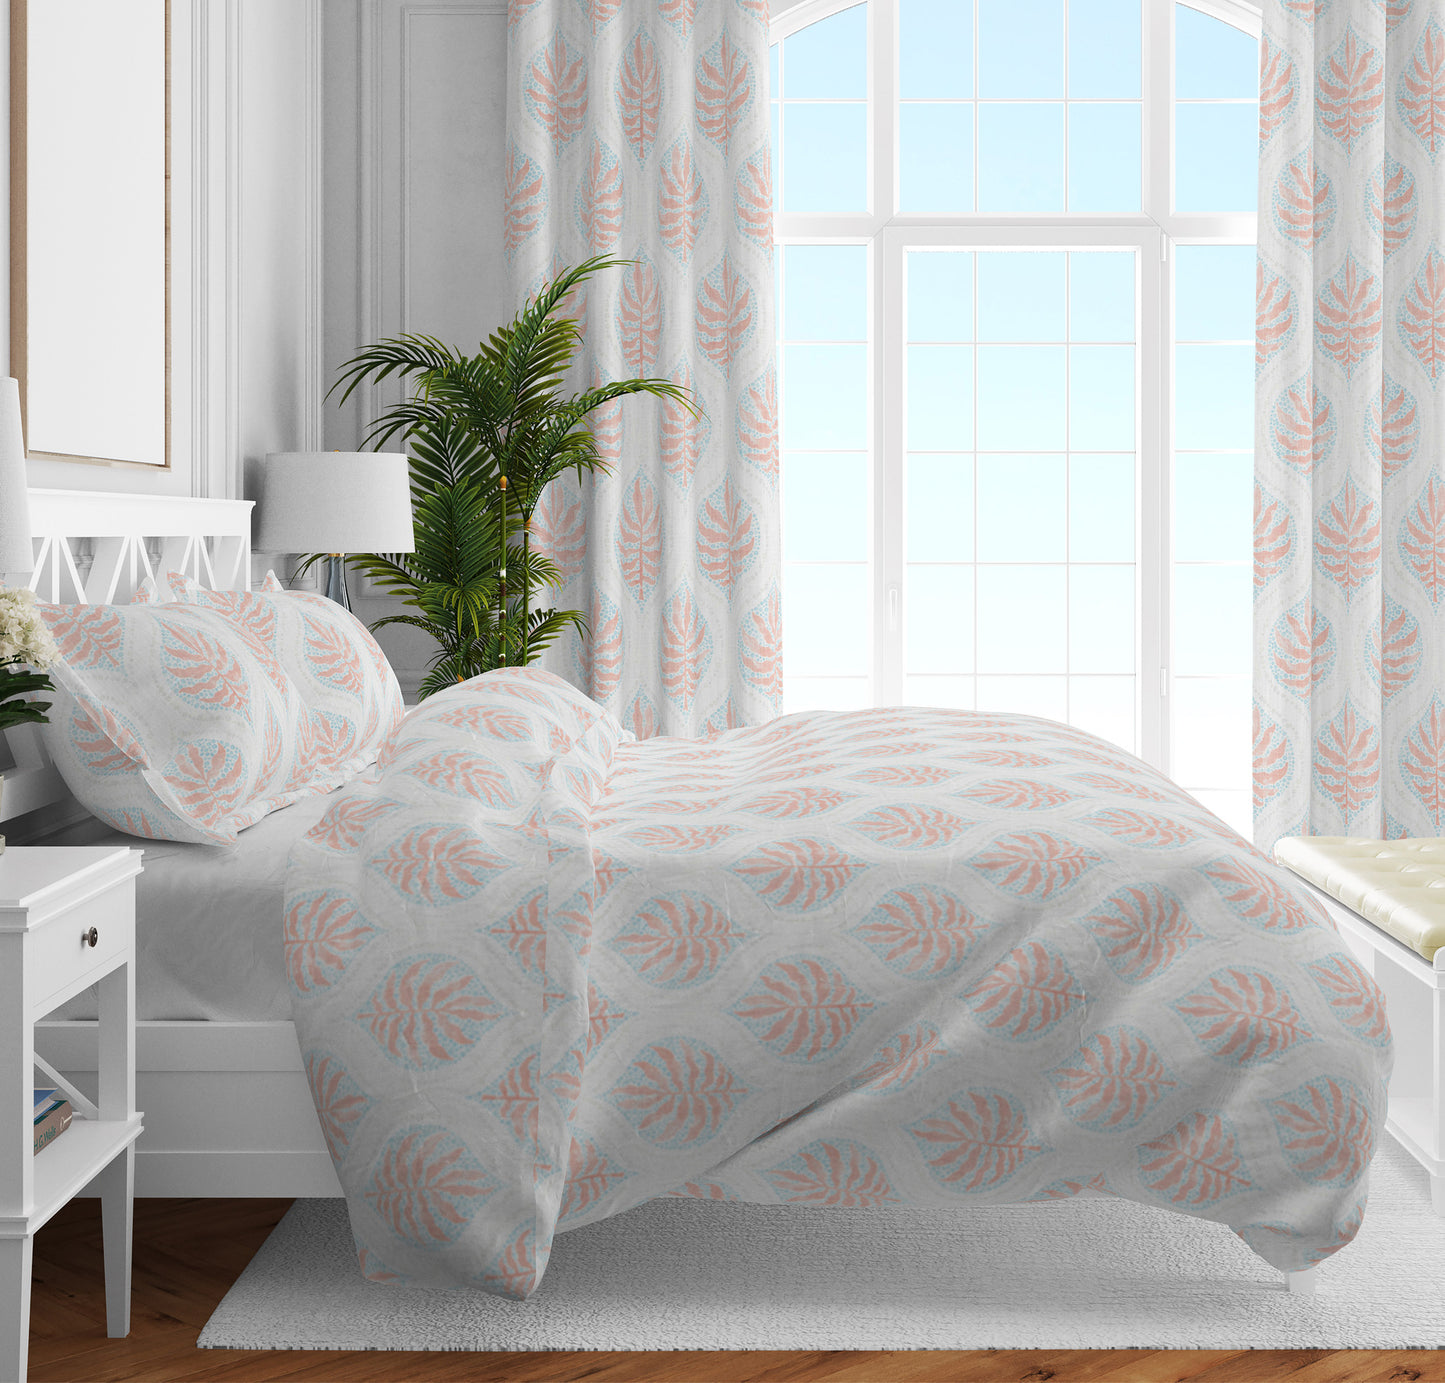 Duvet Cover in Airlie Coral Ogee Floral Watercolor - with Blue, Gray